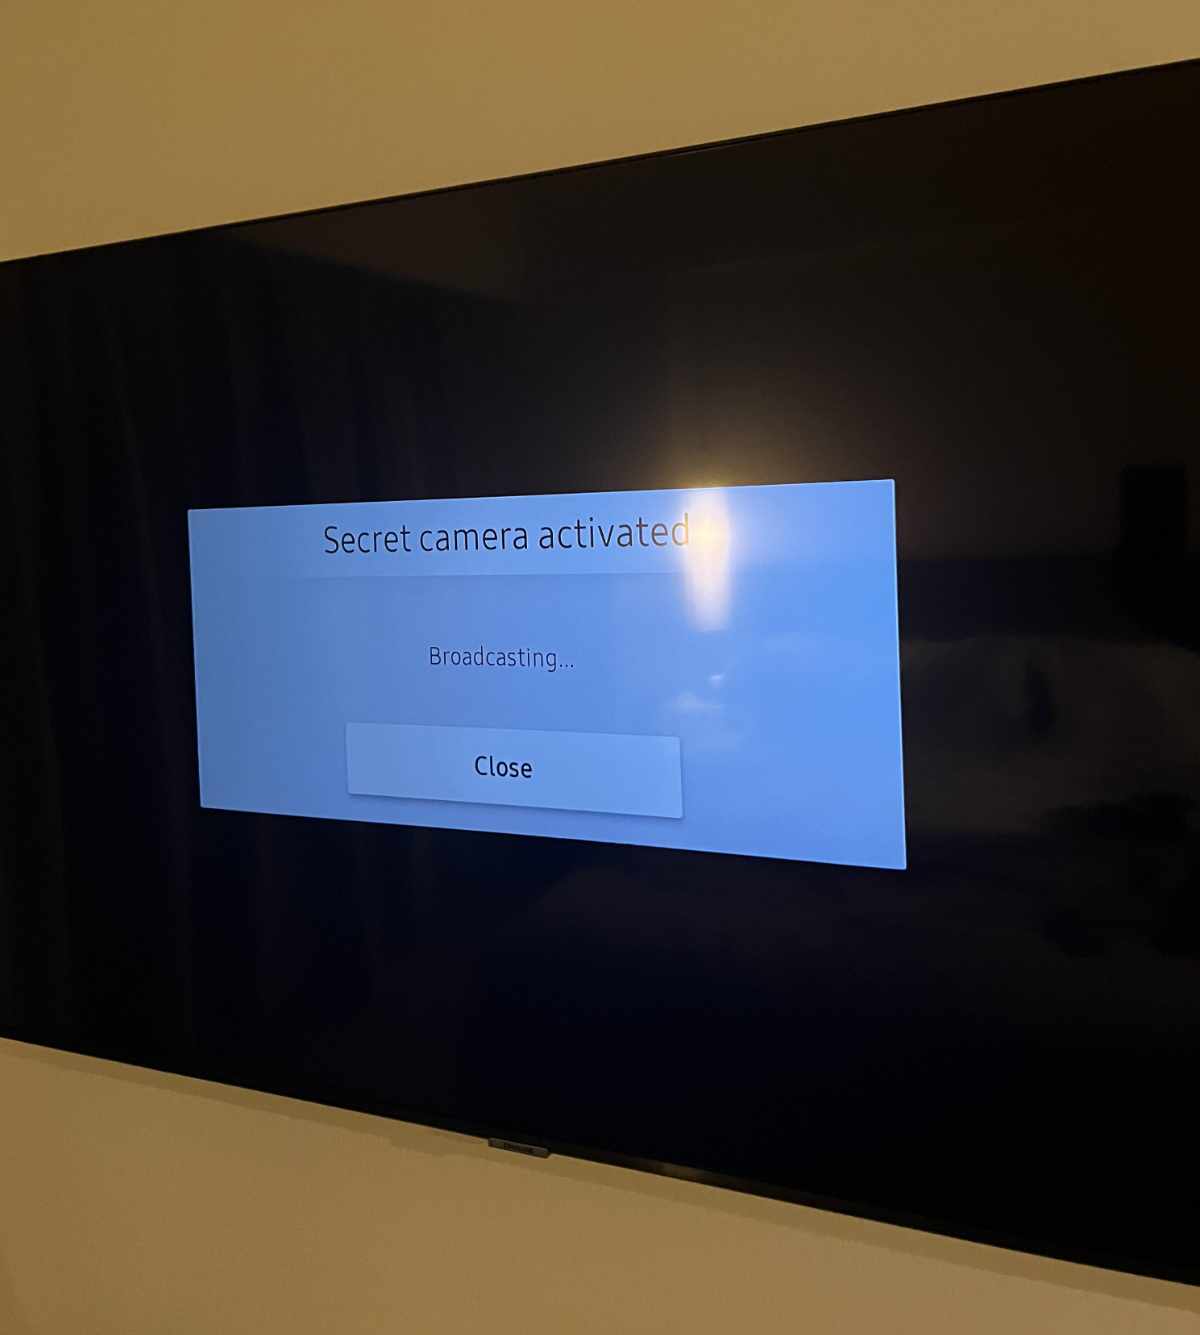 TIL you can change a hotel TVs welcome message